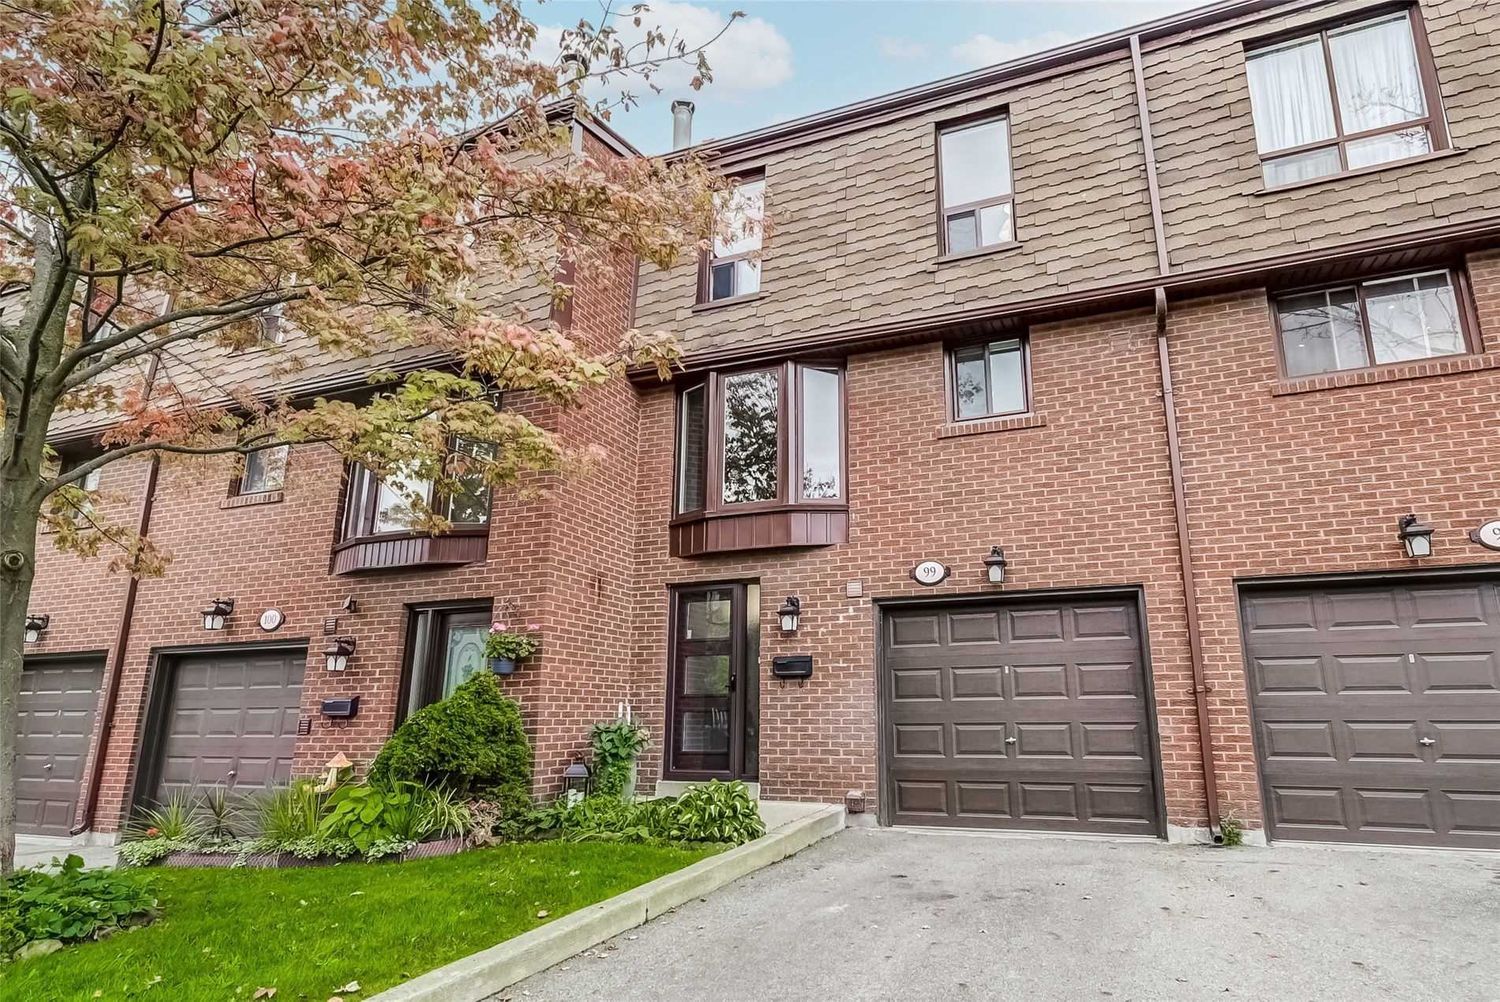 3395 Cliff Road N. 3395 Cliff Rd Townhomes is located in  Mississauga, Toronto - image #2 of 2